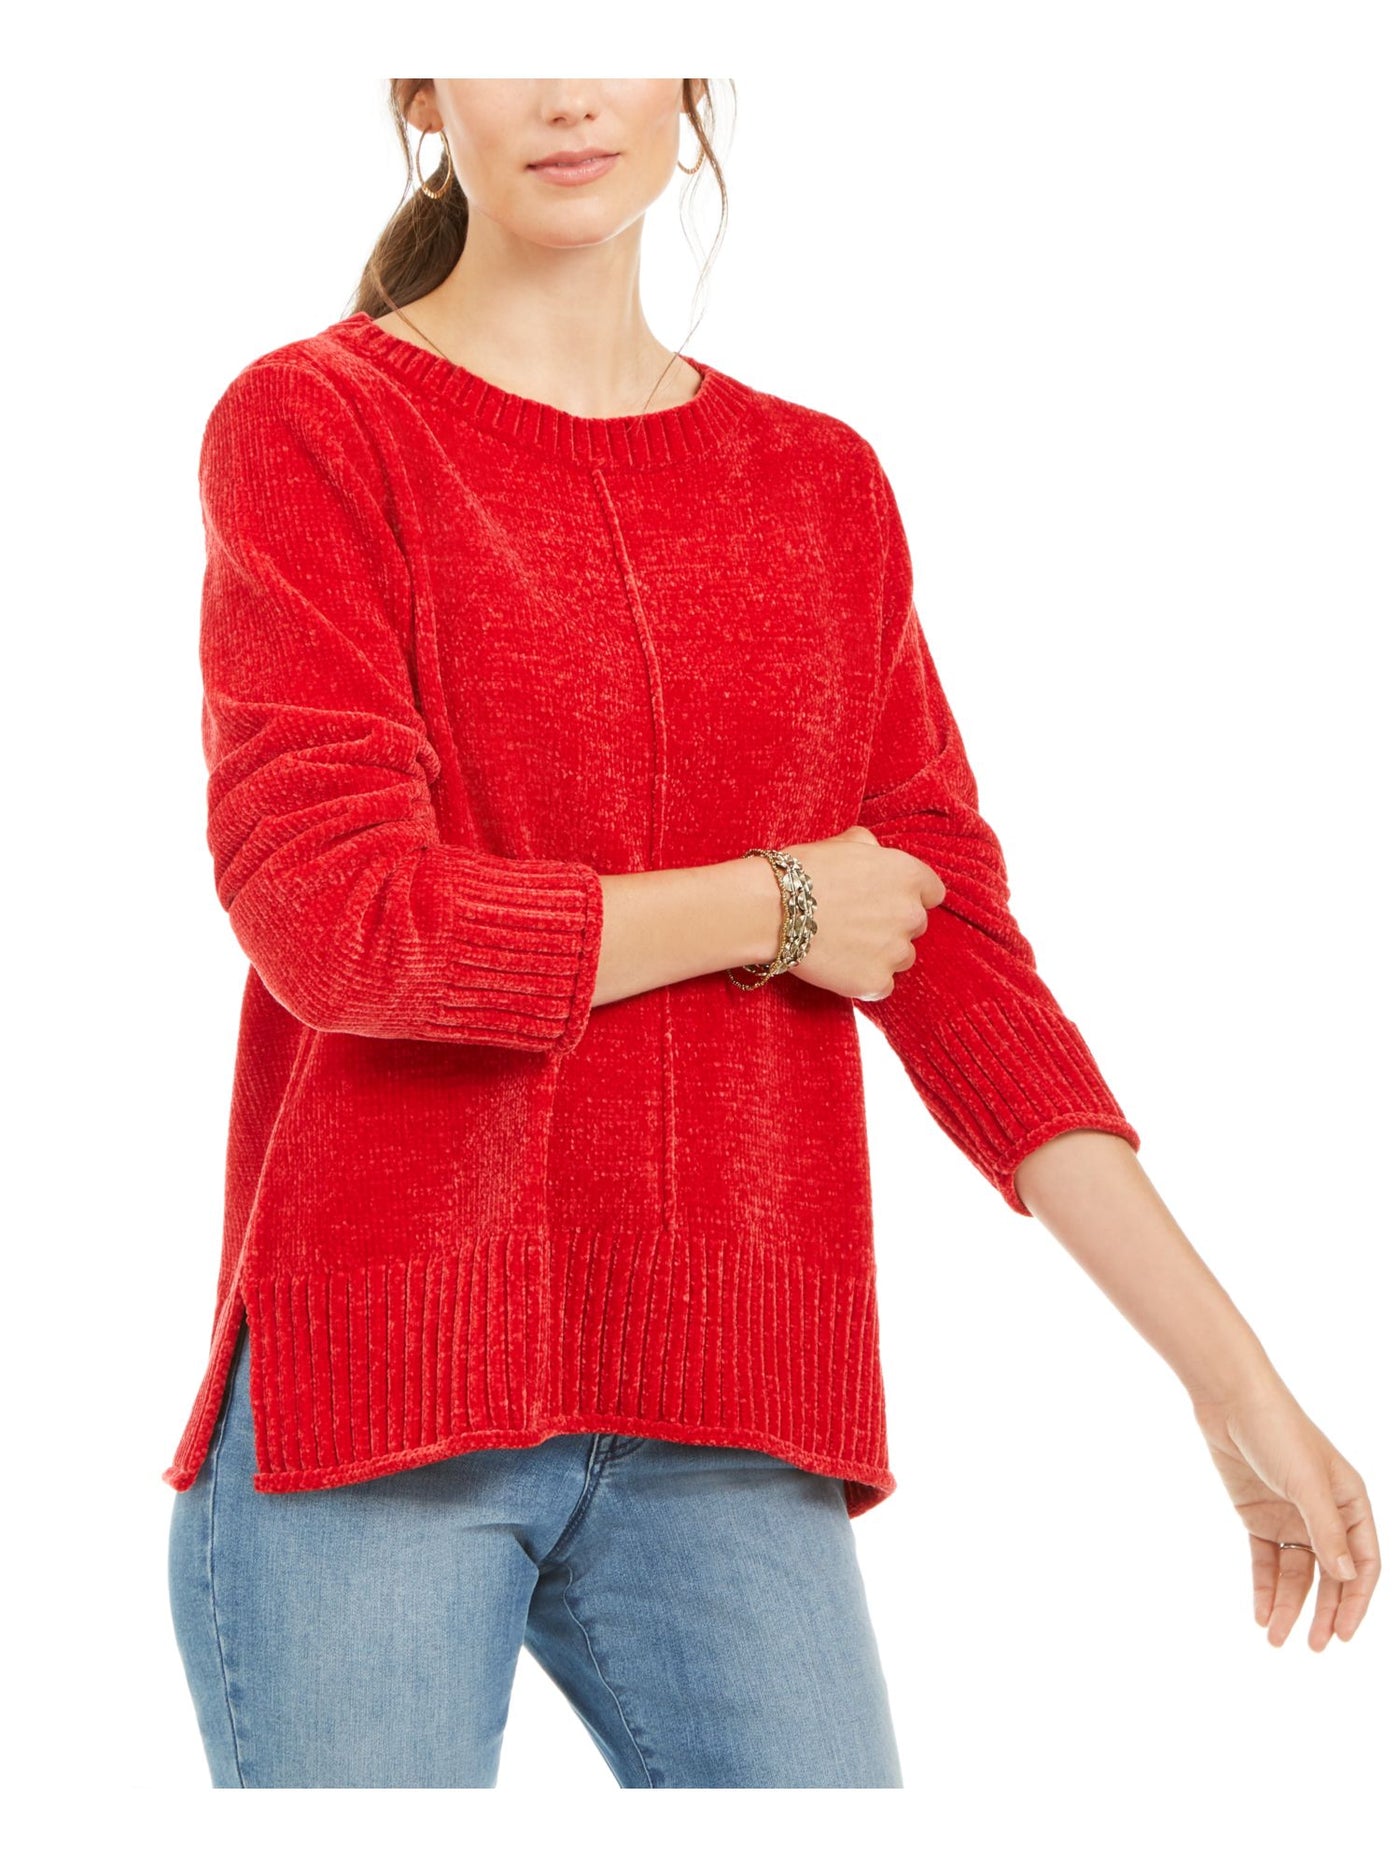 STYLE & COMPANY Womens Red Textured Heather Long Sleeve Crew Neck Blouse XL